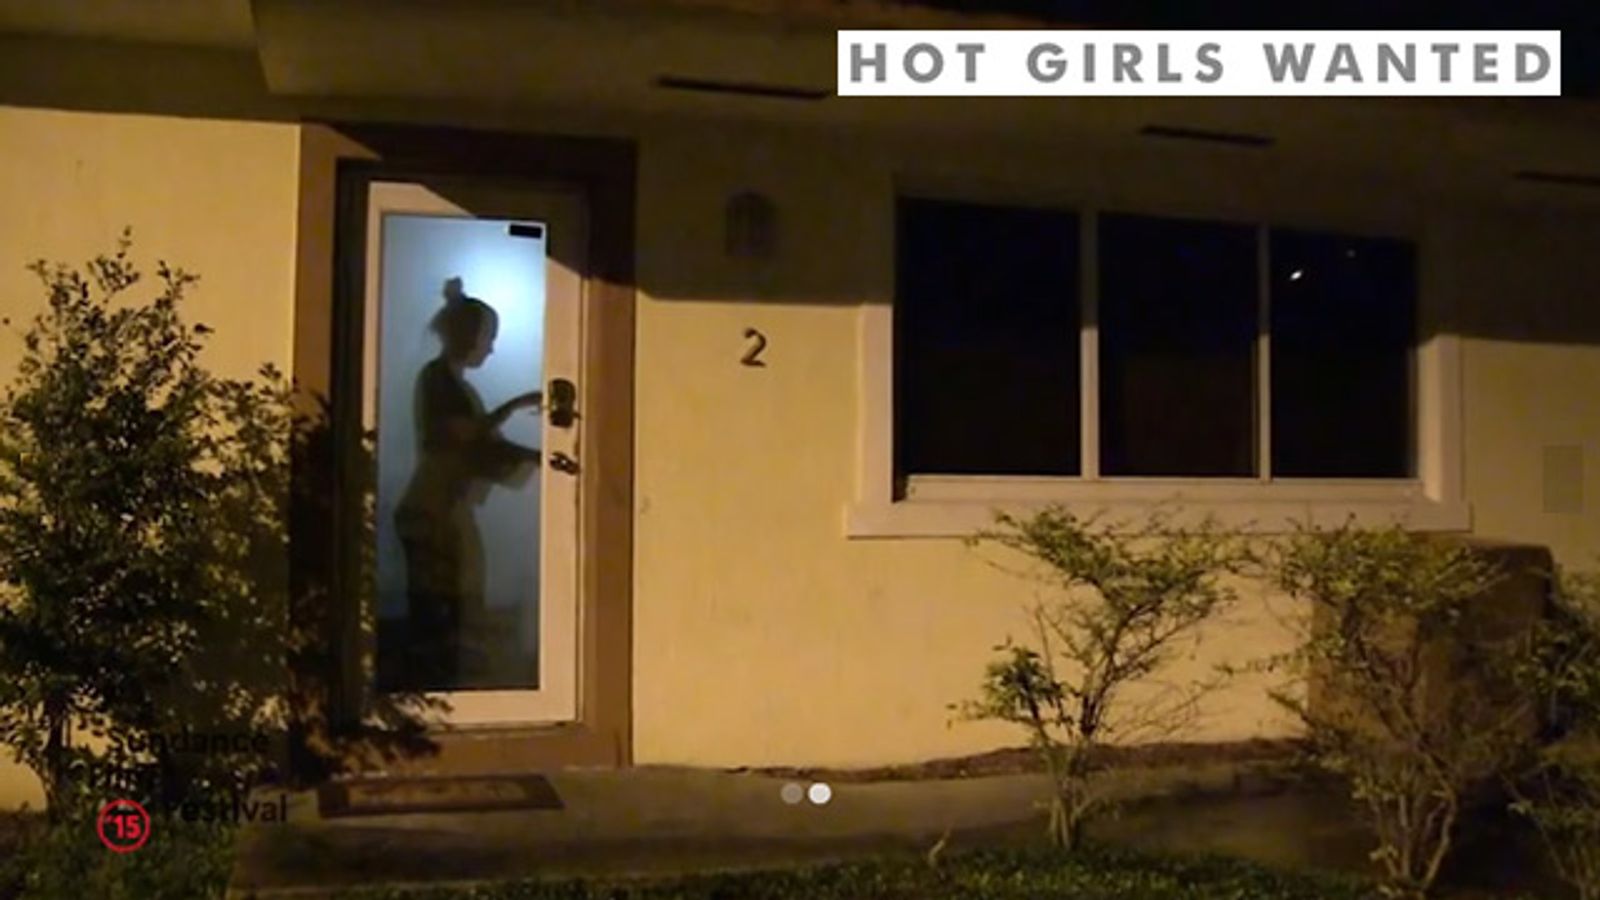 'Hot Girls Wanted': The Bullshit Continues